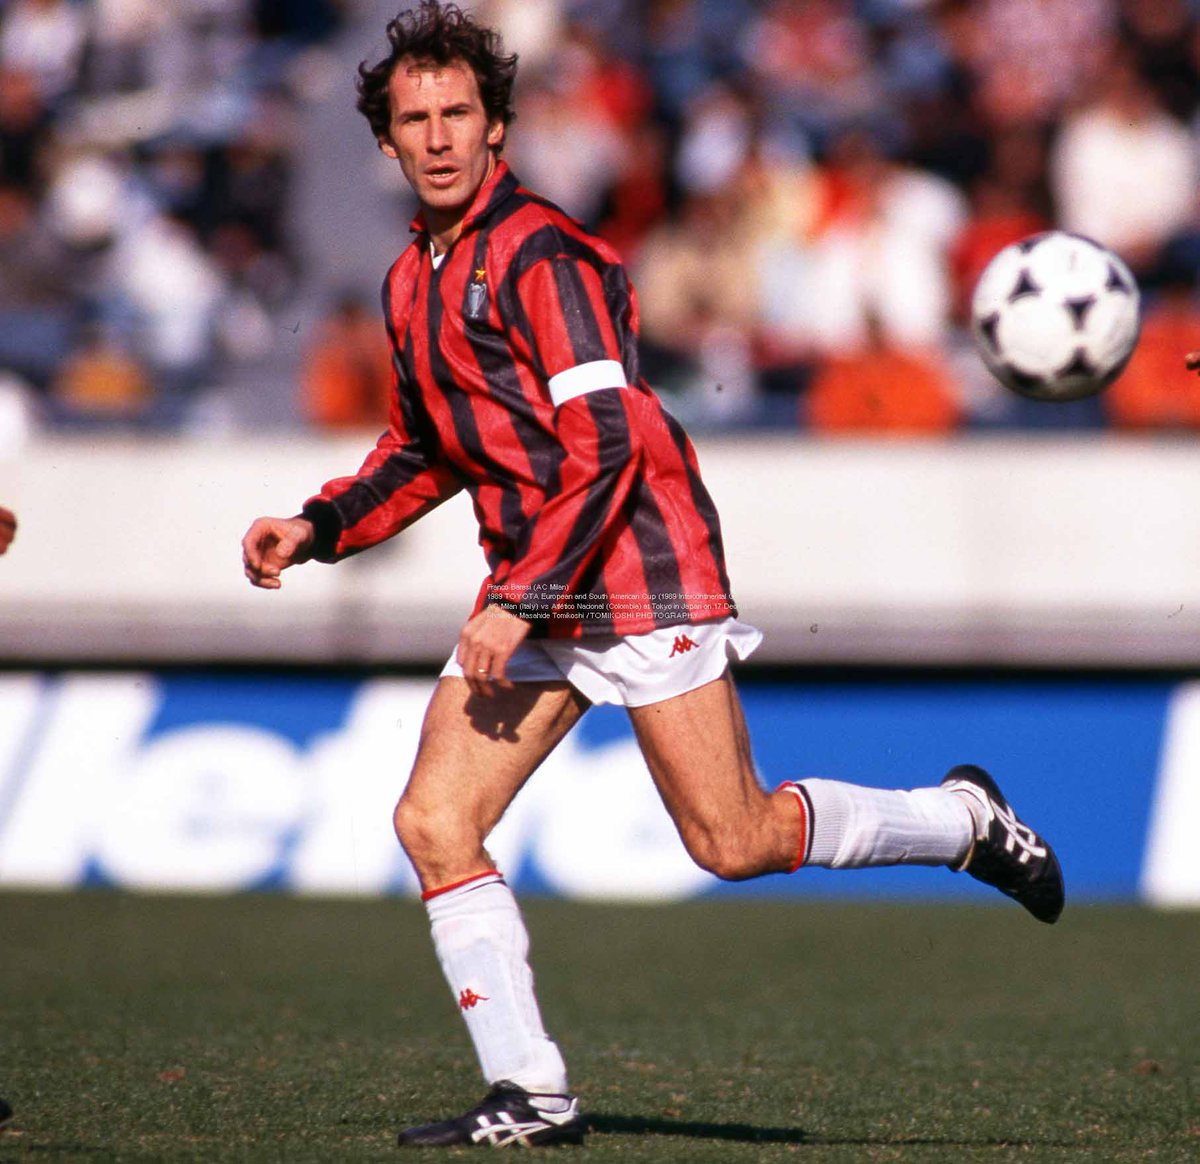 galdeblæren regulere Malawi tphoto on Twitter: "Franco Baresi (AC Milan) 1989 TOYOTA European and South  American Cup (1989 Intercontinental Cup) AC Milan (Italy) vs Atlético  Nacional (Colombia) at Tokyo in Japan on 17 Dec 1989